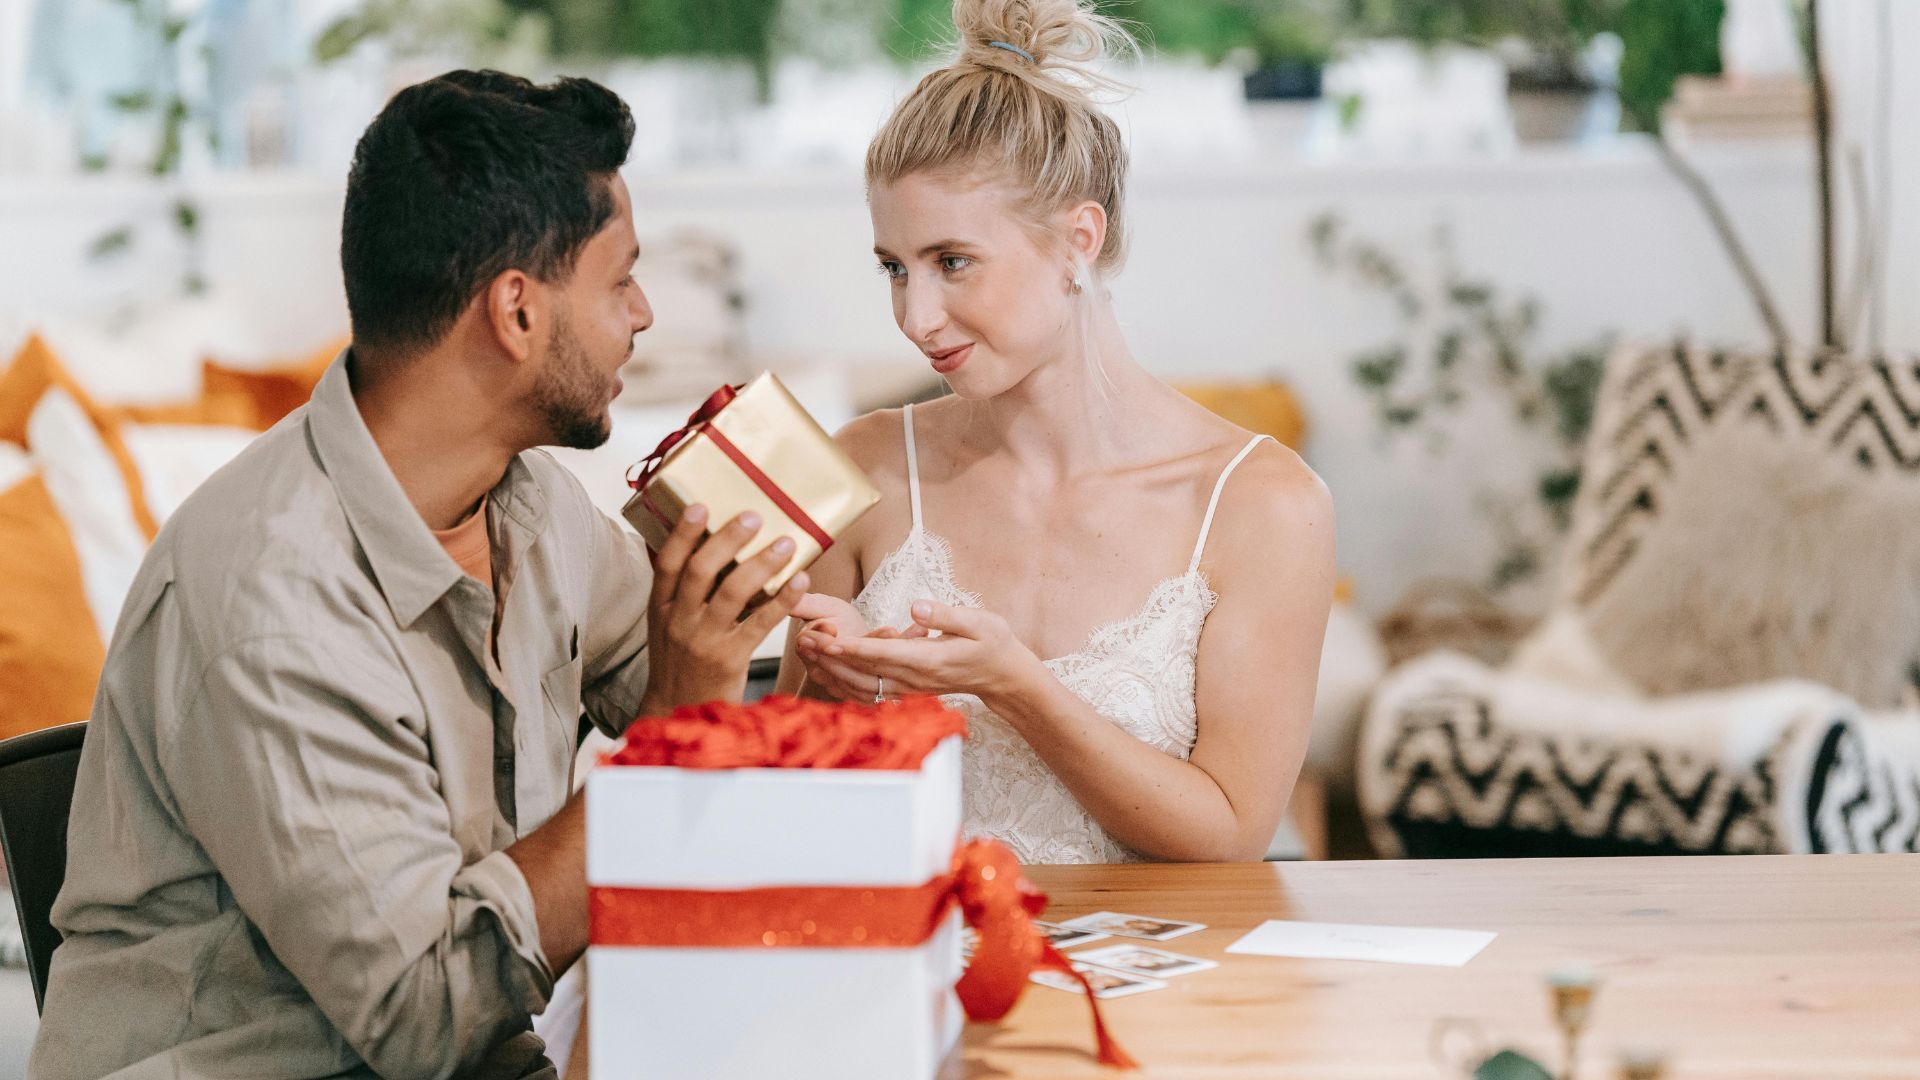 20 Best Christmas Gifts For Wife - Thoughtful Romantic Gifts For Your  Spouse in